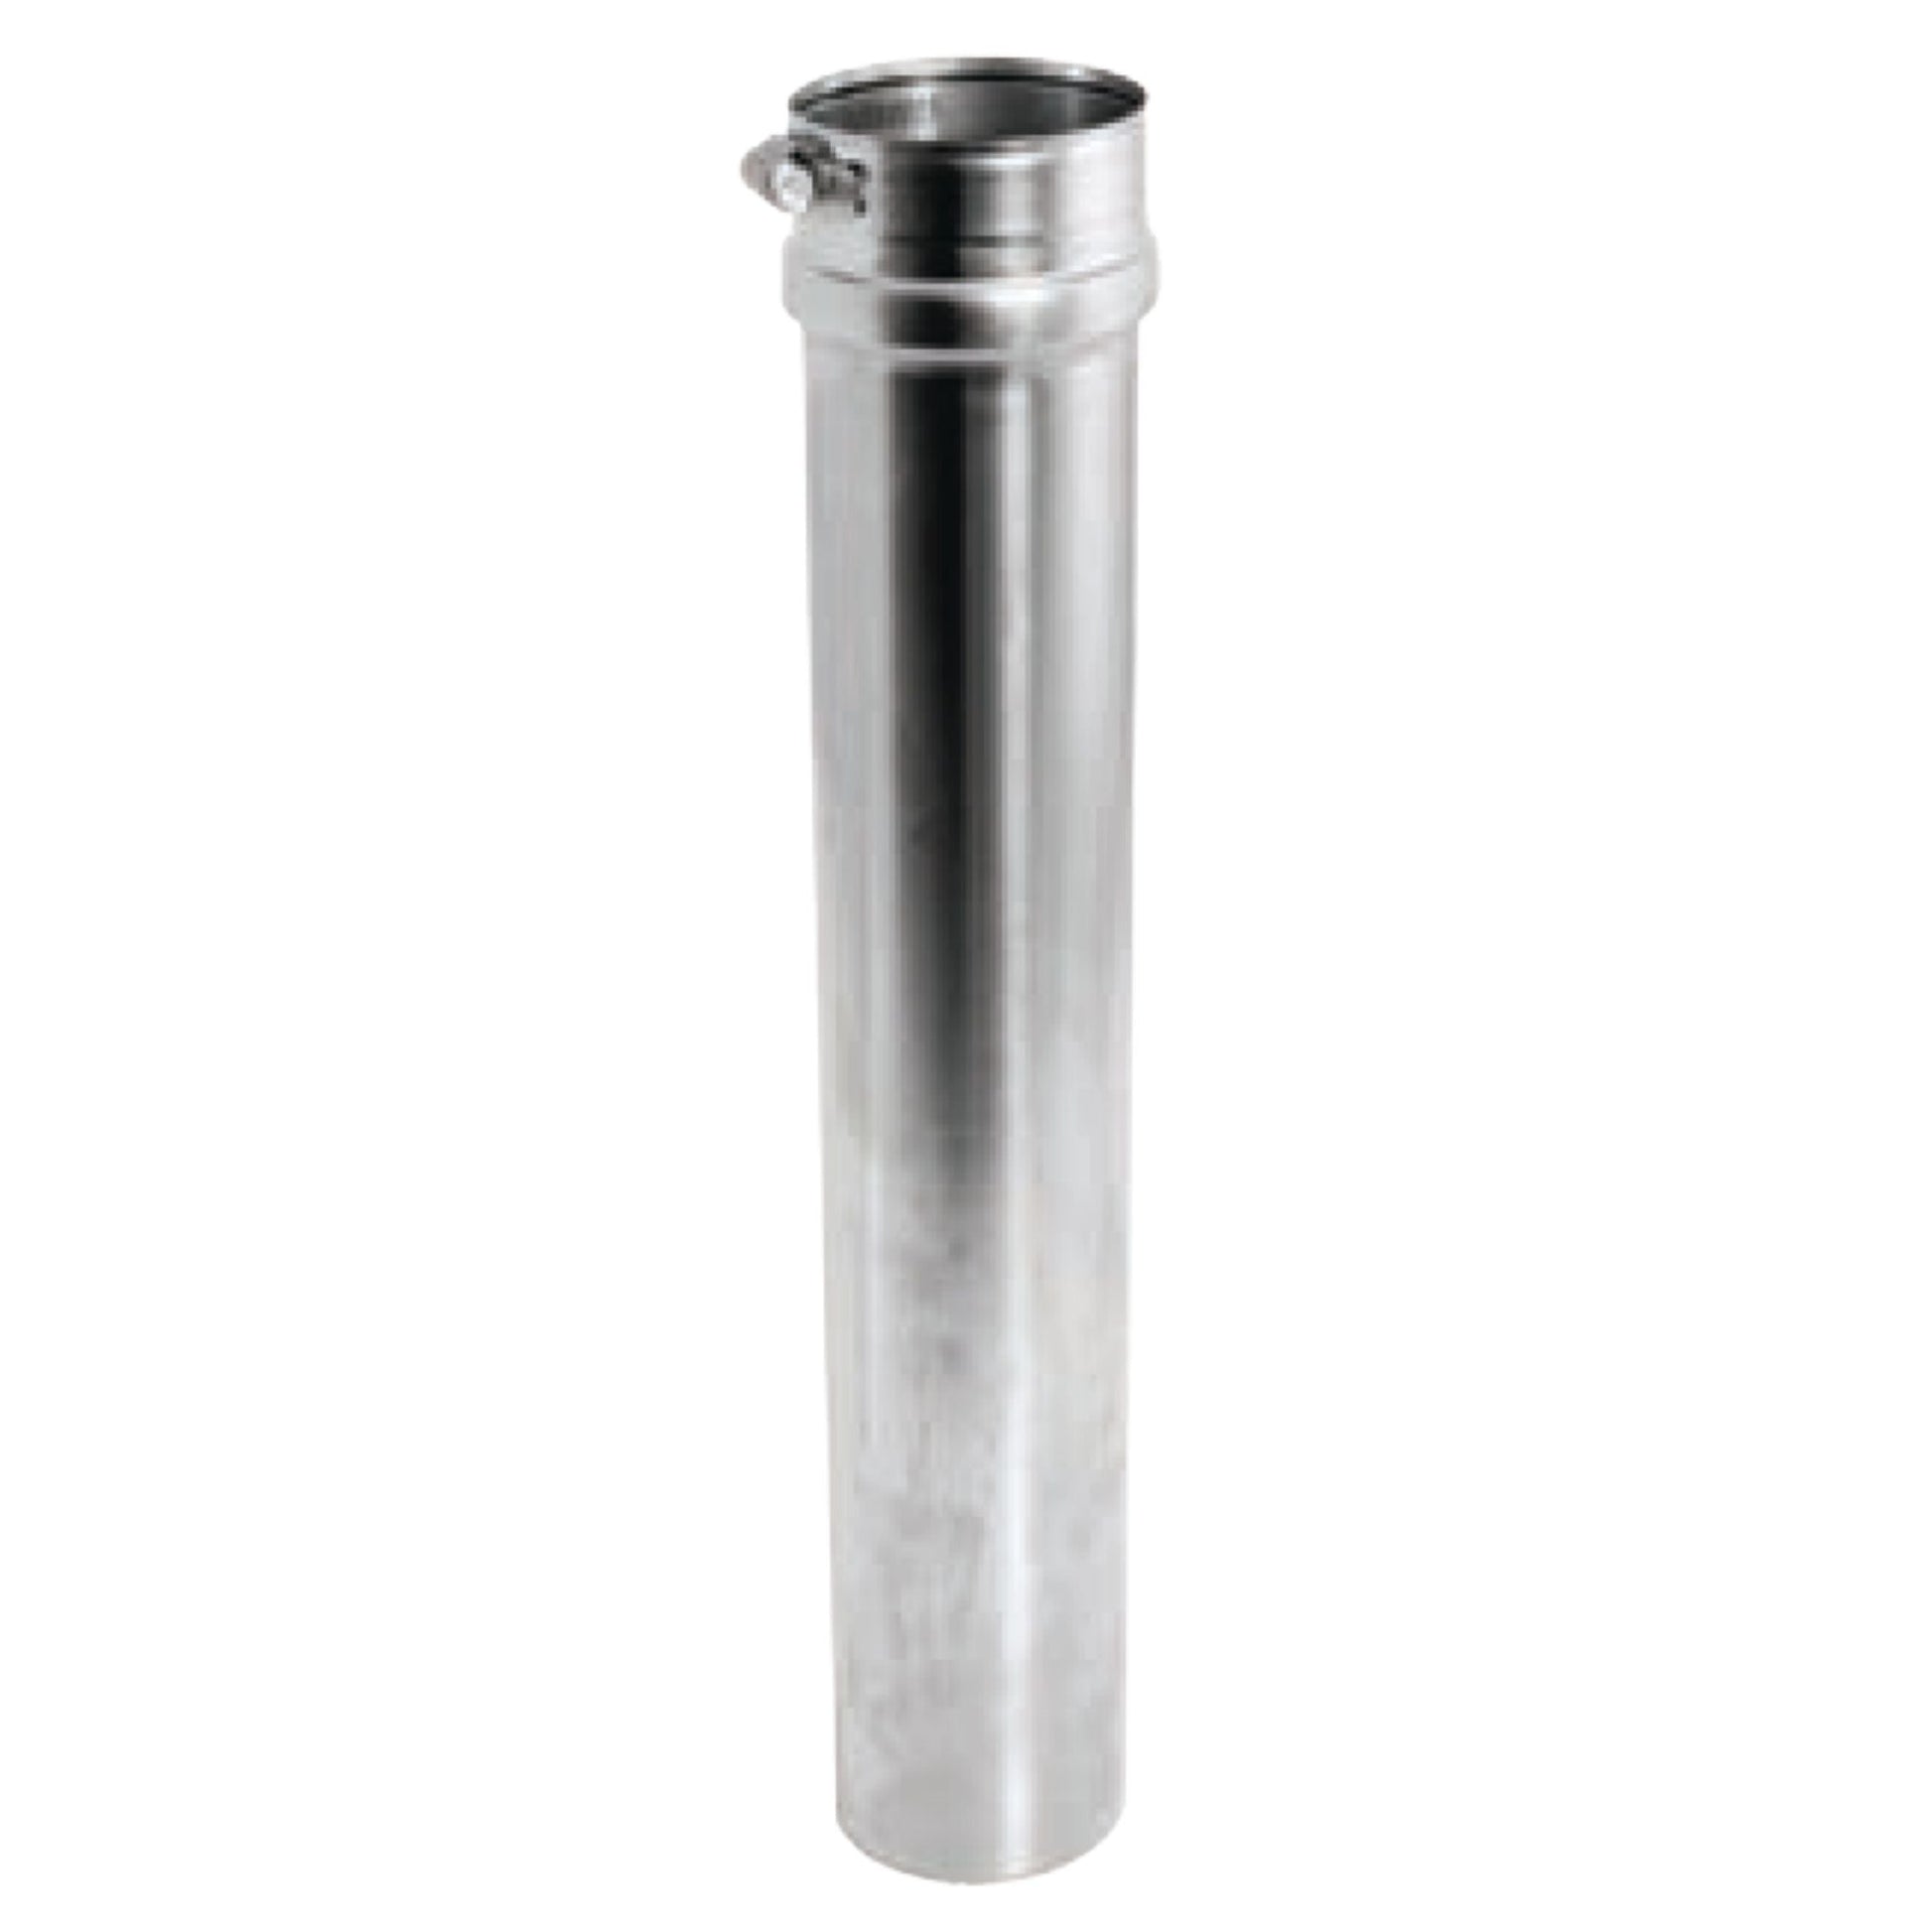 DuraVent FasNSeal 7" x 18" 316L Stainless Steel Adjustable Vent Length